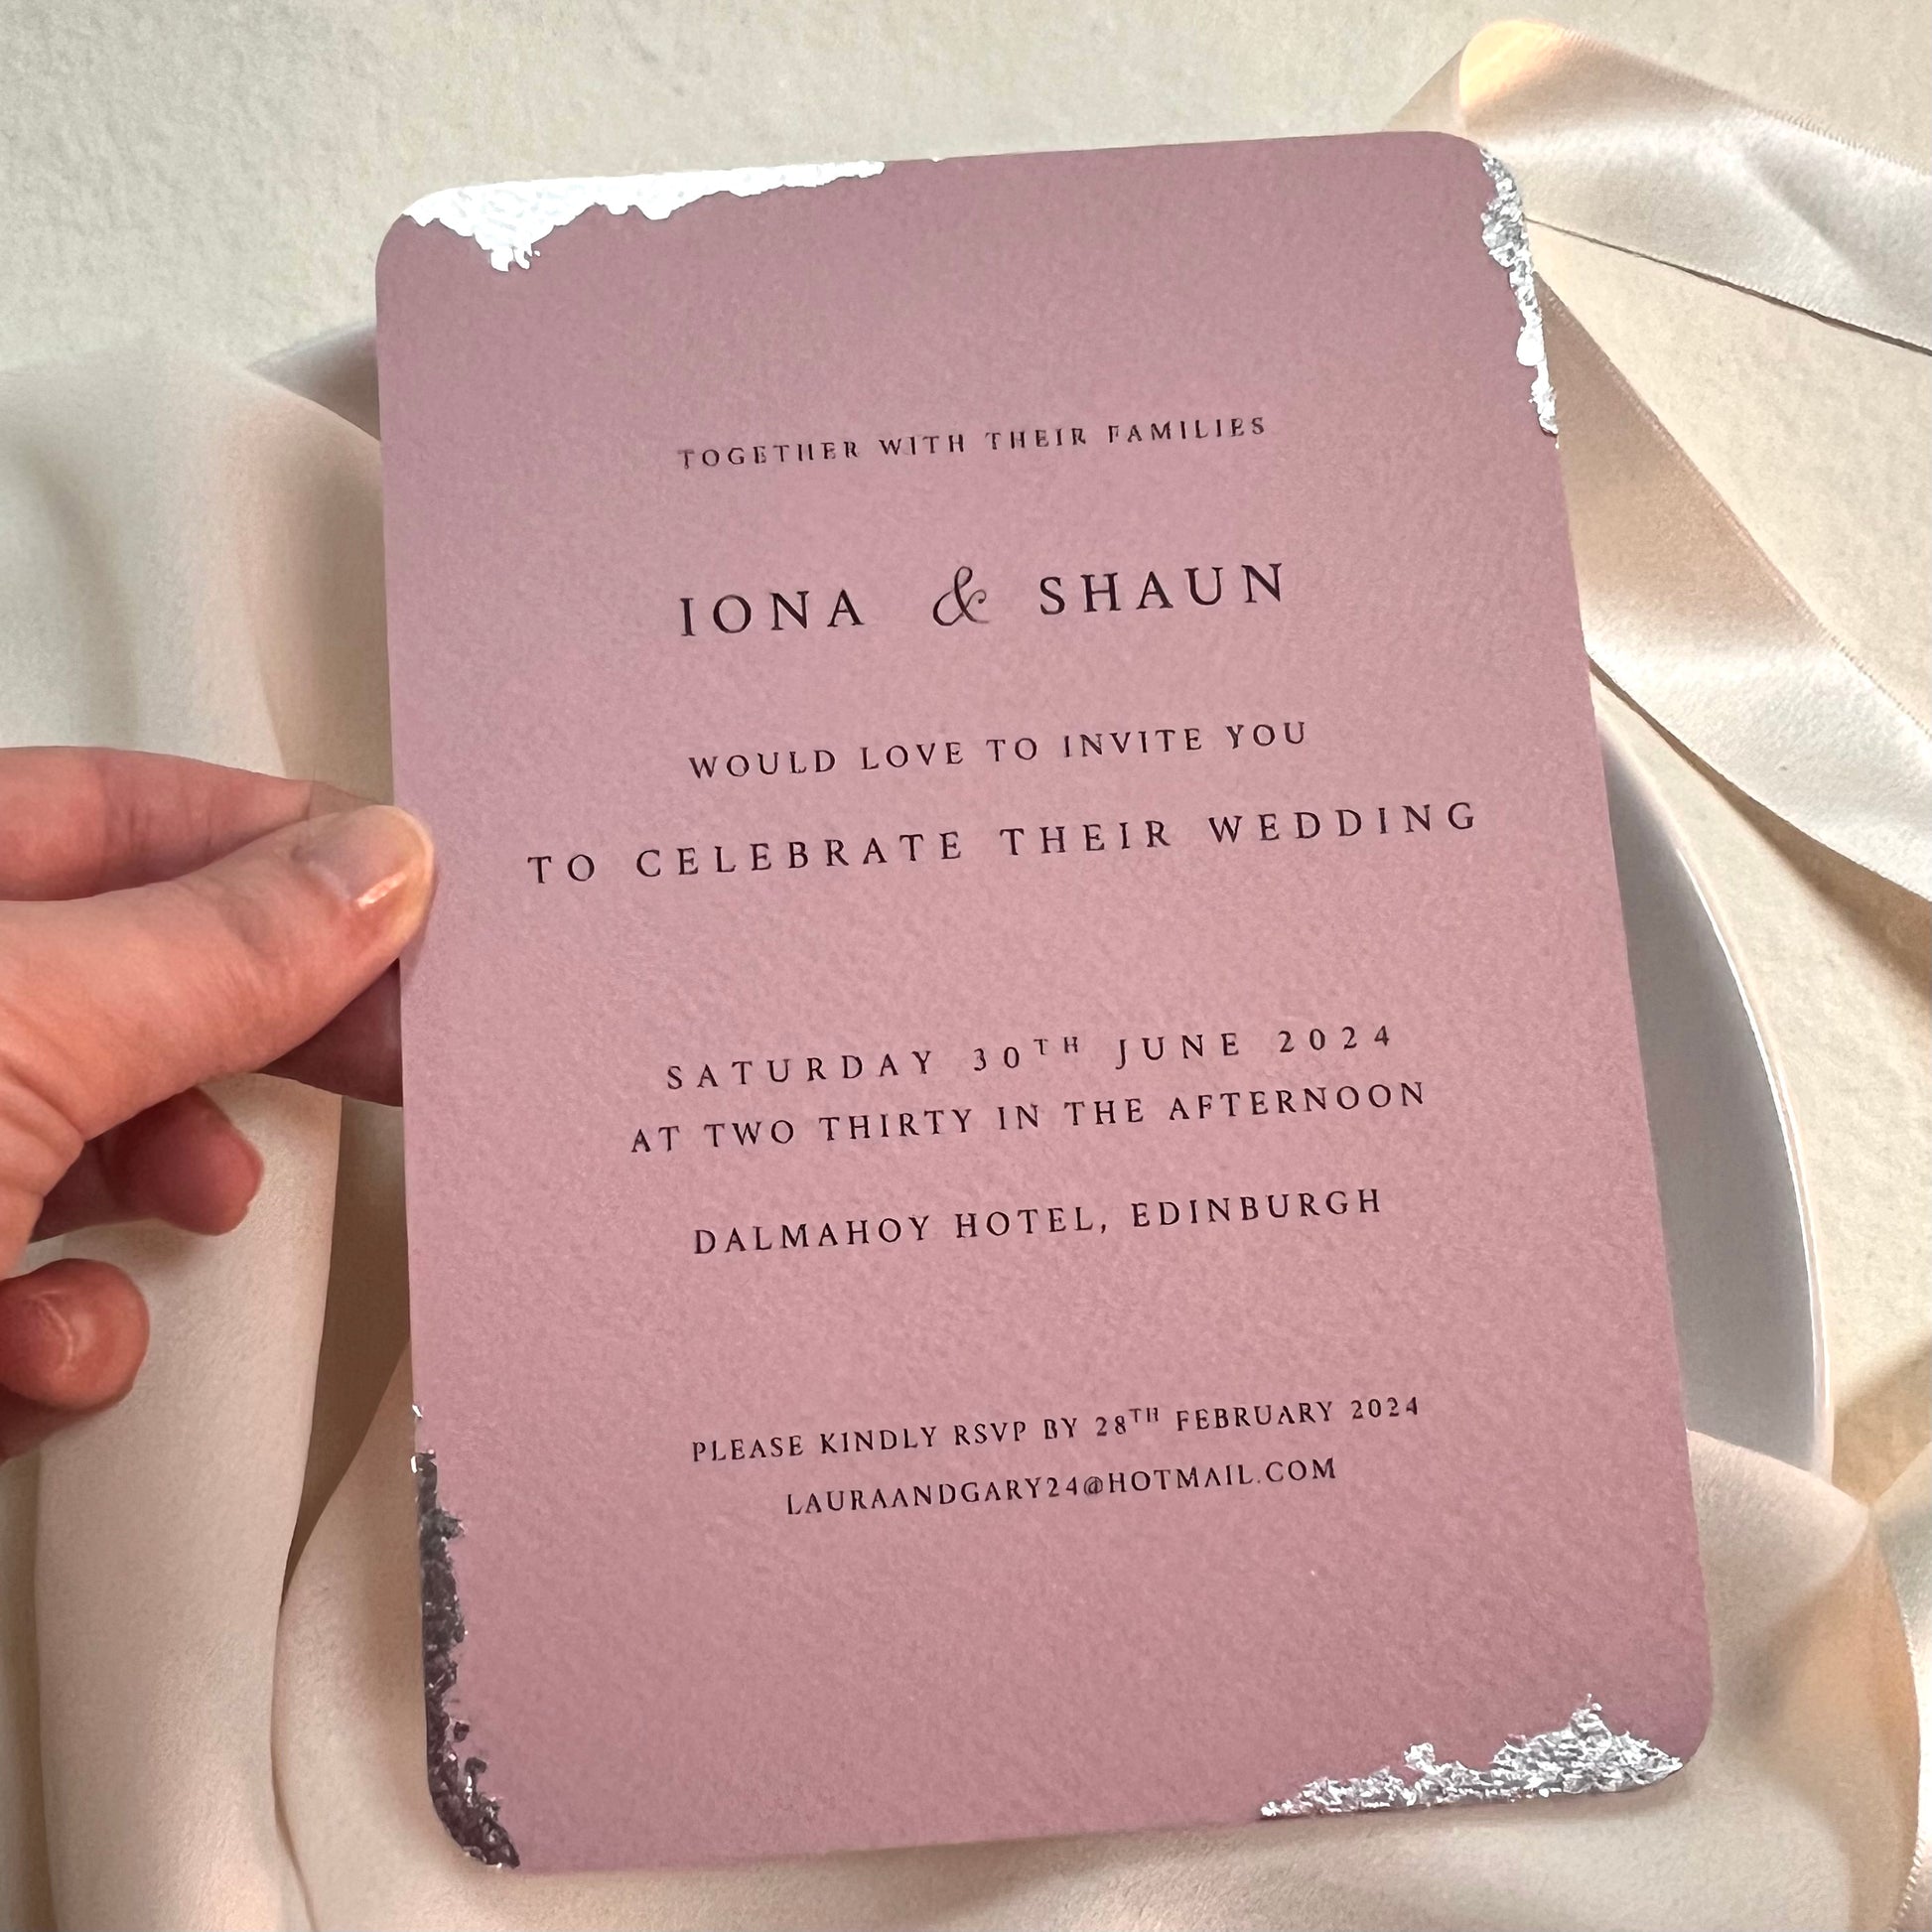 hand holding dusty pink wedding invitation with silver foil detail around edges 